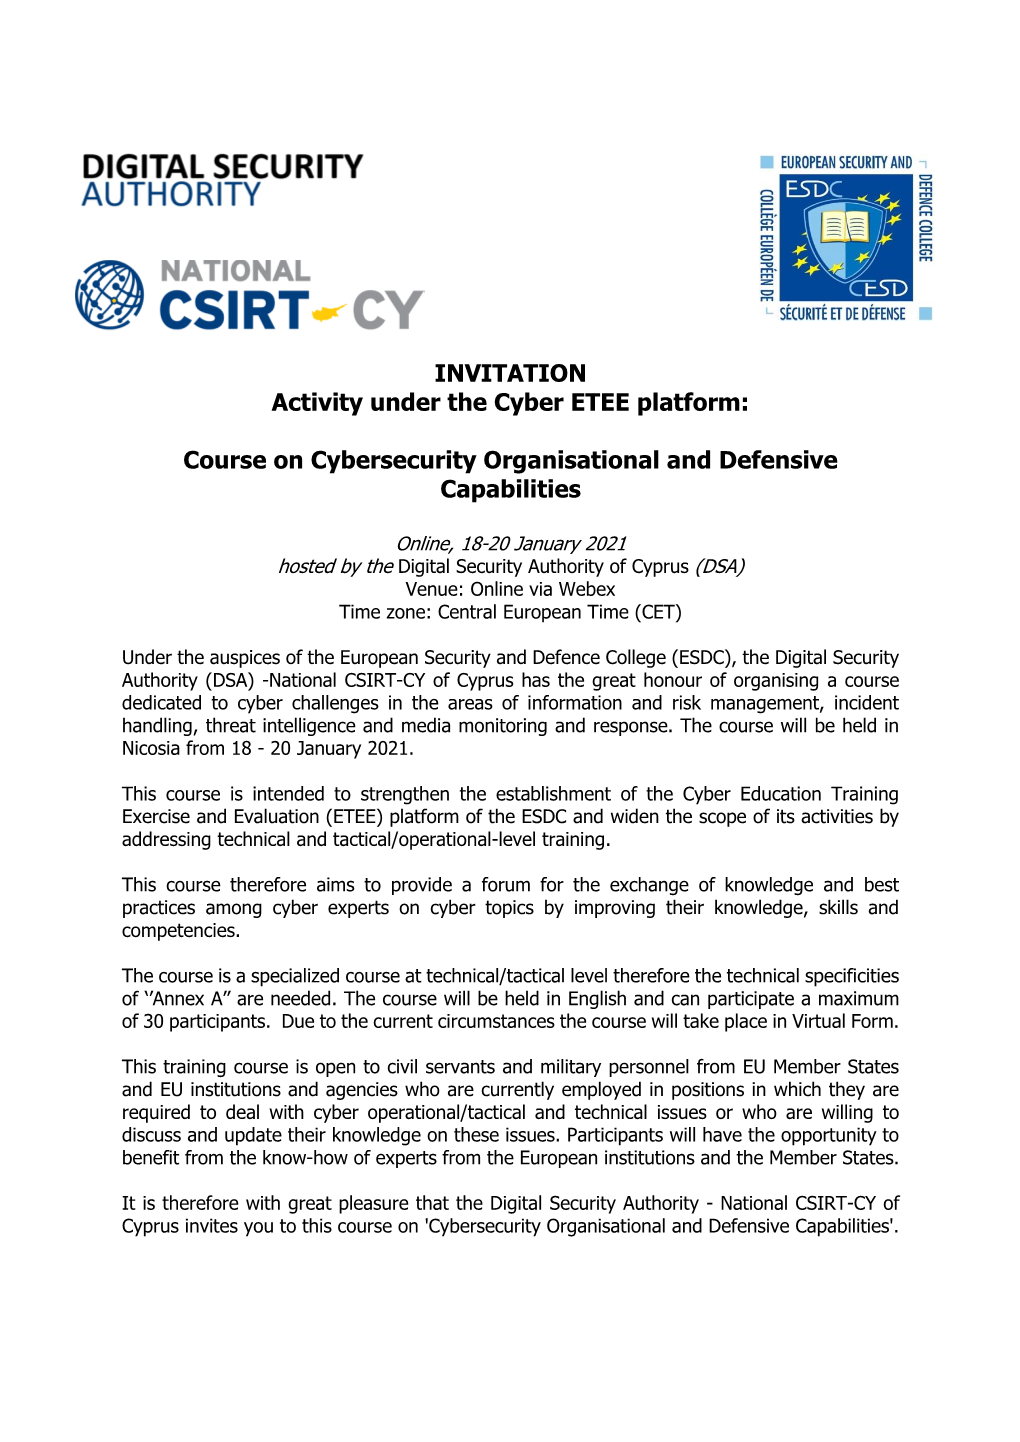 INVITATION Activity Under the Cyber ETEE Platform: Course on Cybersecurity Organisational and Defensive Capabilities